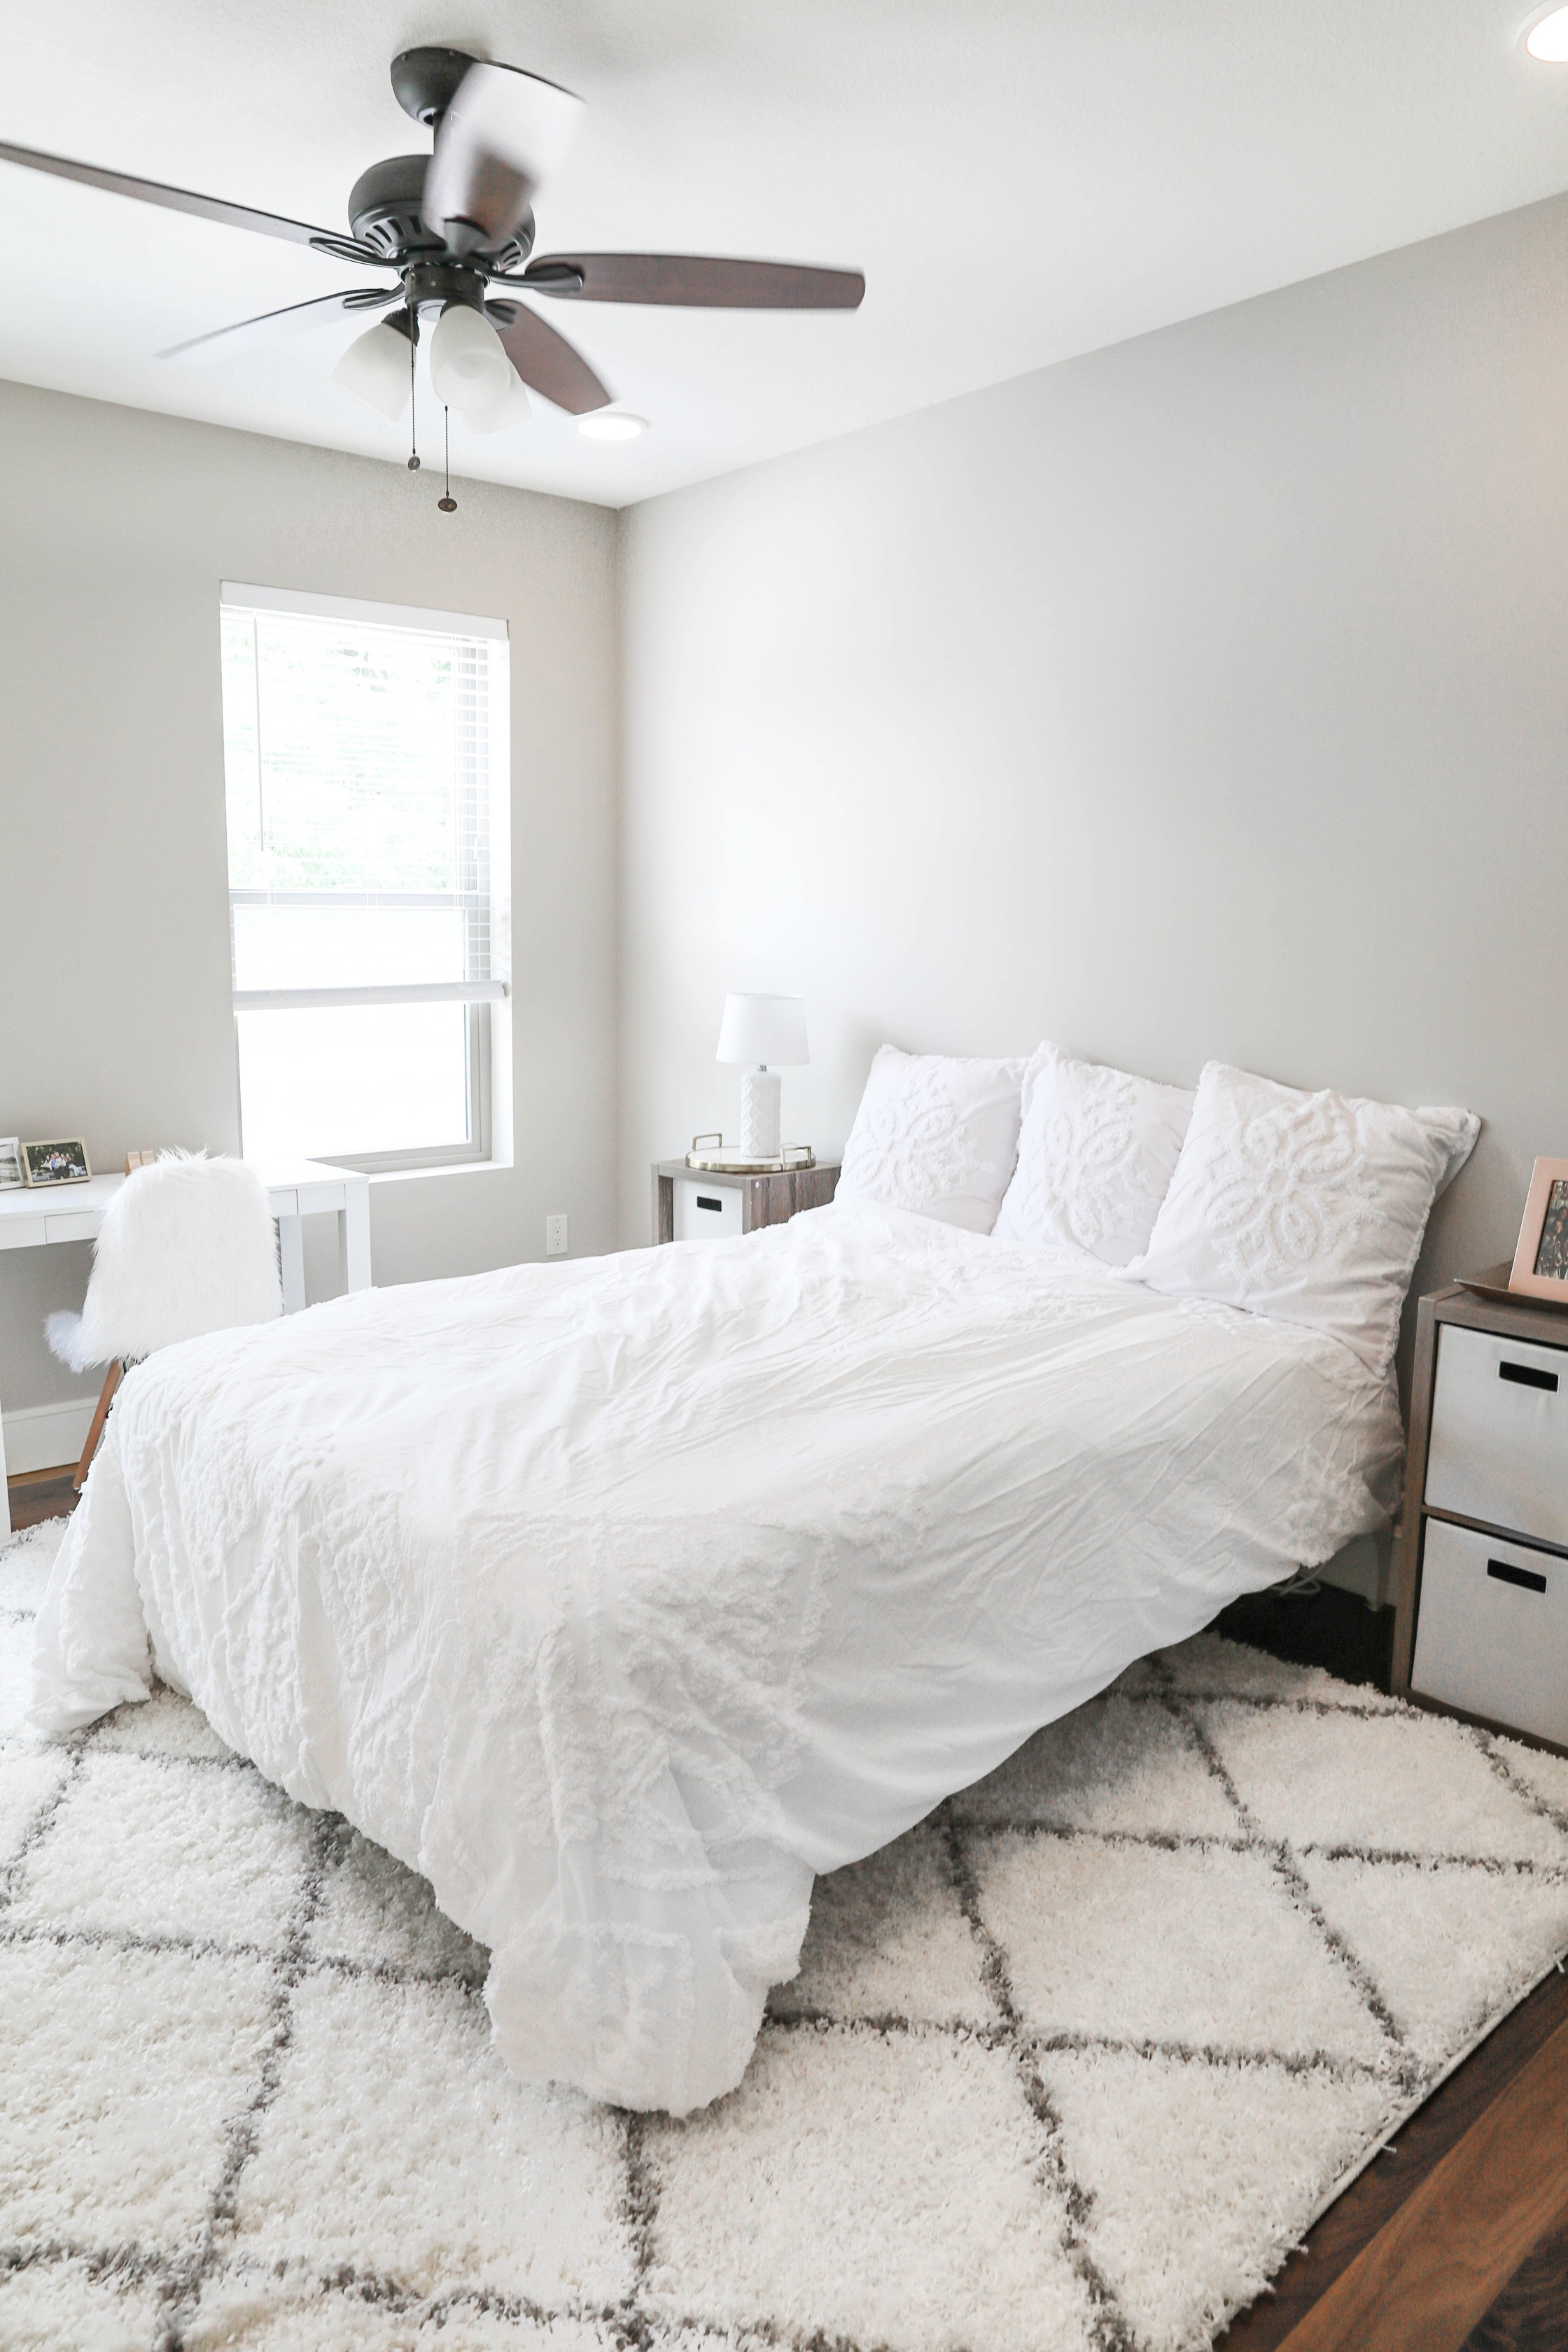 I moved! Sneak peak apartment tour for my white and gray room! I love simple and elegant apartment decor! My nuloom rug looks so good with my white furniture! Details on daily dose of charm by lauren lindmark